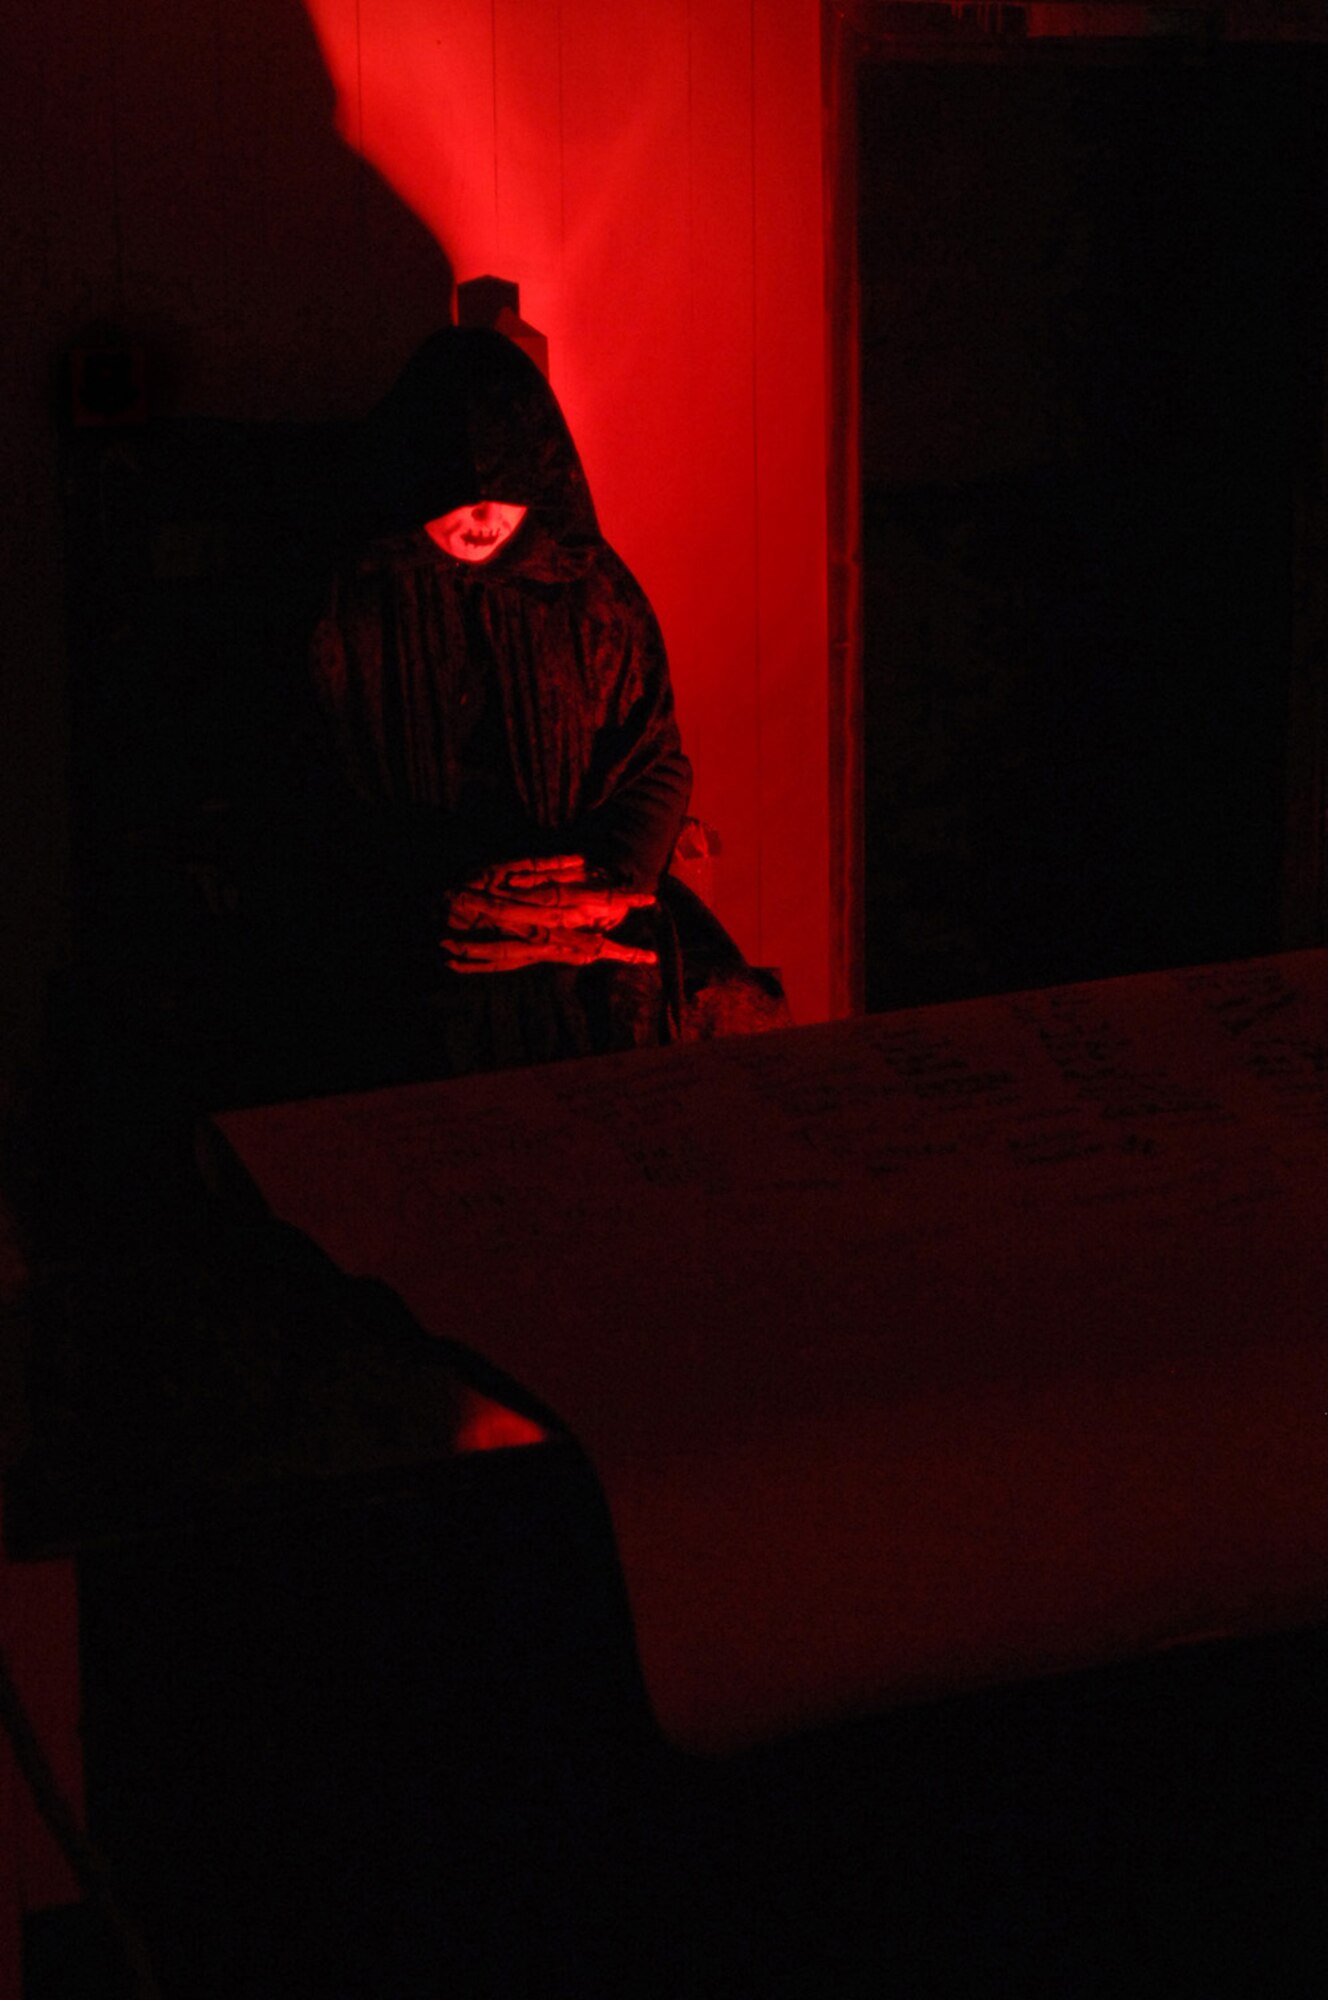 “The Grim Reaper” awaits patrons entering the Logistics Readiness Squadron Communications Squadron Haunt World here Oct. 30, 2008. “The Grim Reaper” brief patrons of safety measures, emergency exits and health concerns for anyone entering the 13 room haunted house. The Haunted house will be held in Building 518. Hours of operation are 6 to 11 p.m., price is $6 for all ages. (U.S. Air Force photo by Senior Airman Teresa M. Hawkins)